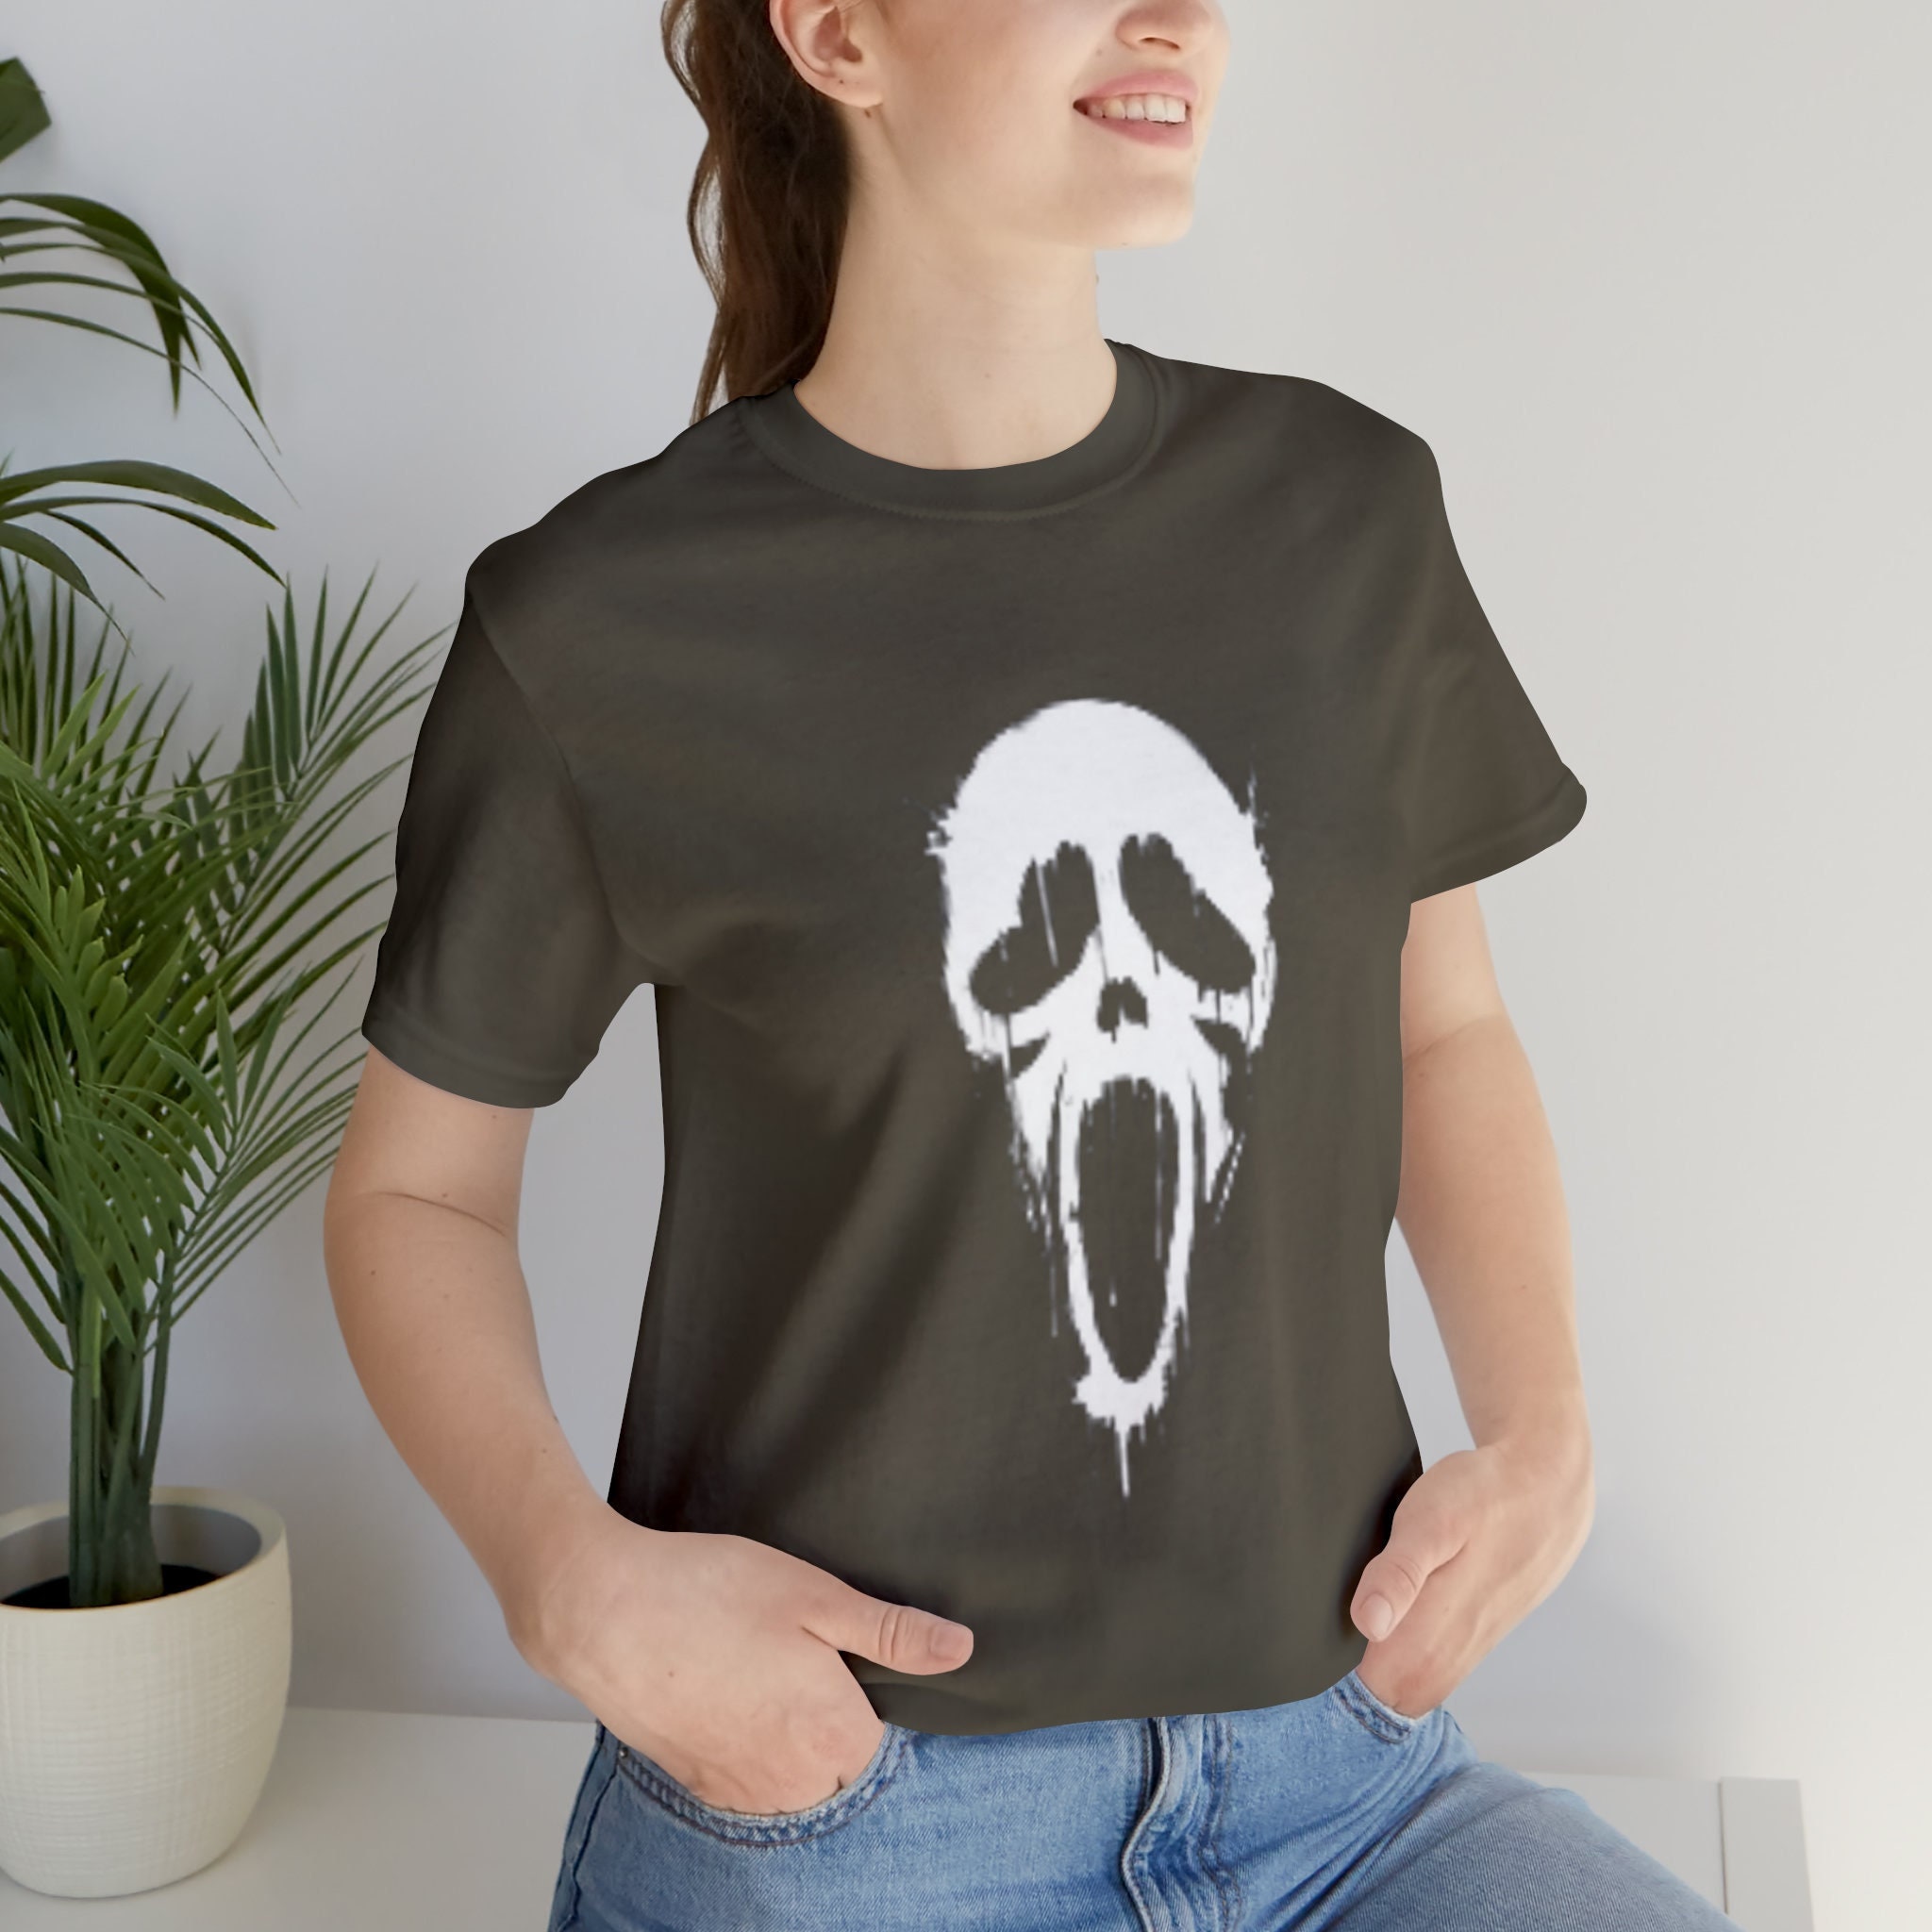 Funny Ghost Face Shirt - Spooky Halloween Ghost Face Costume T-Shirt